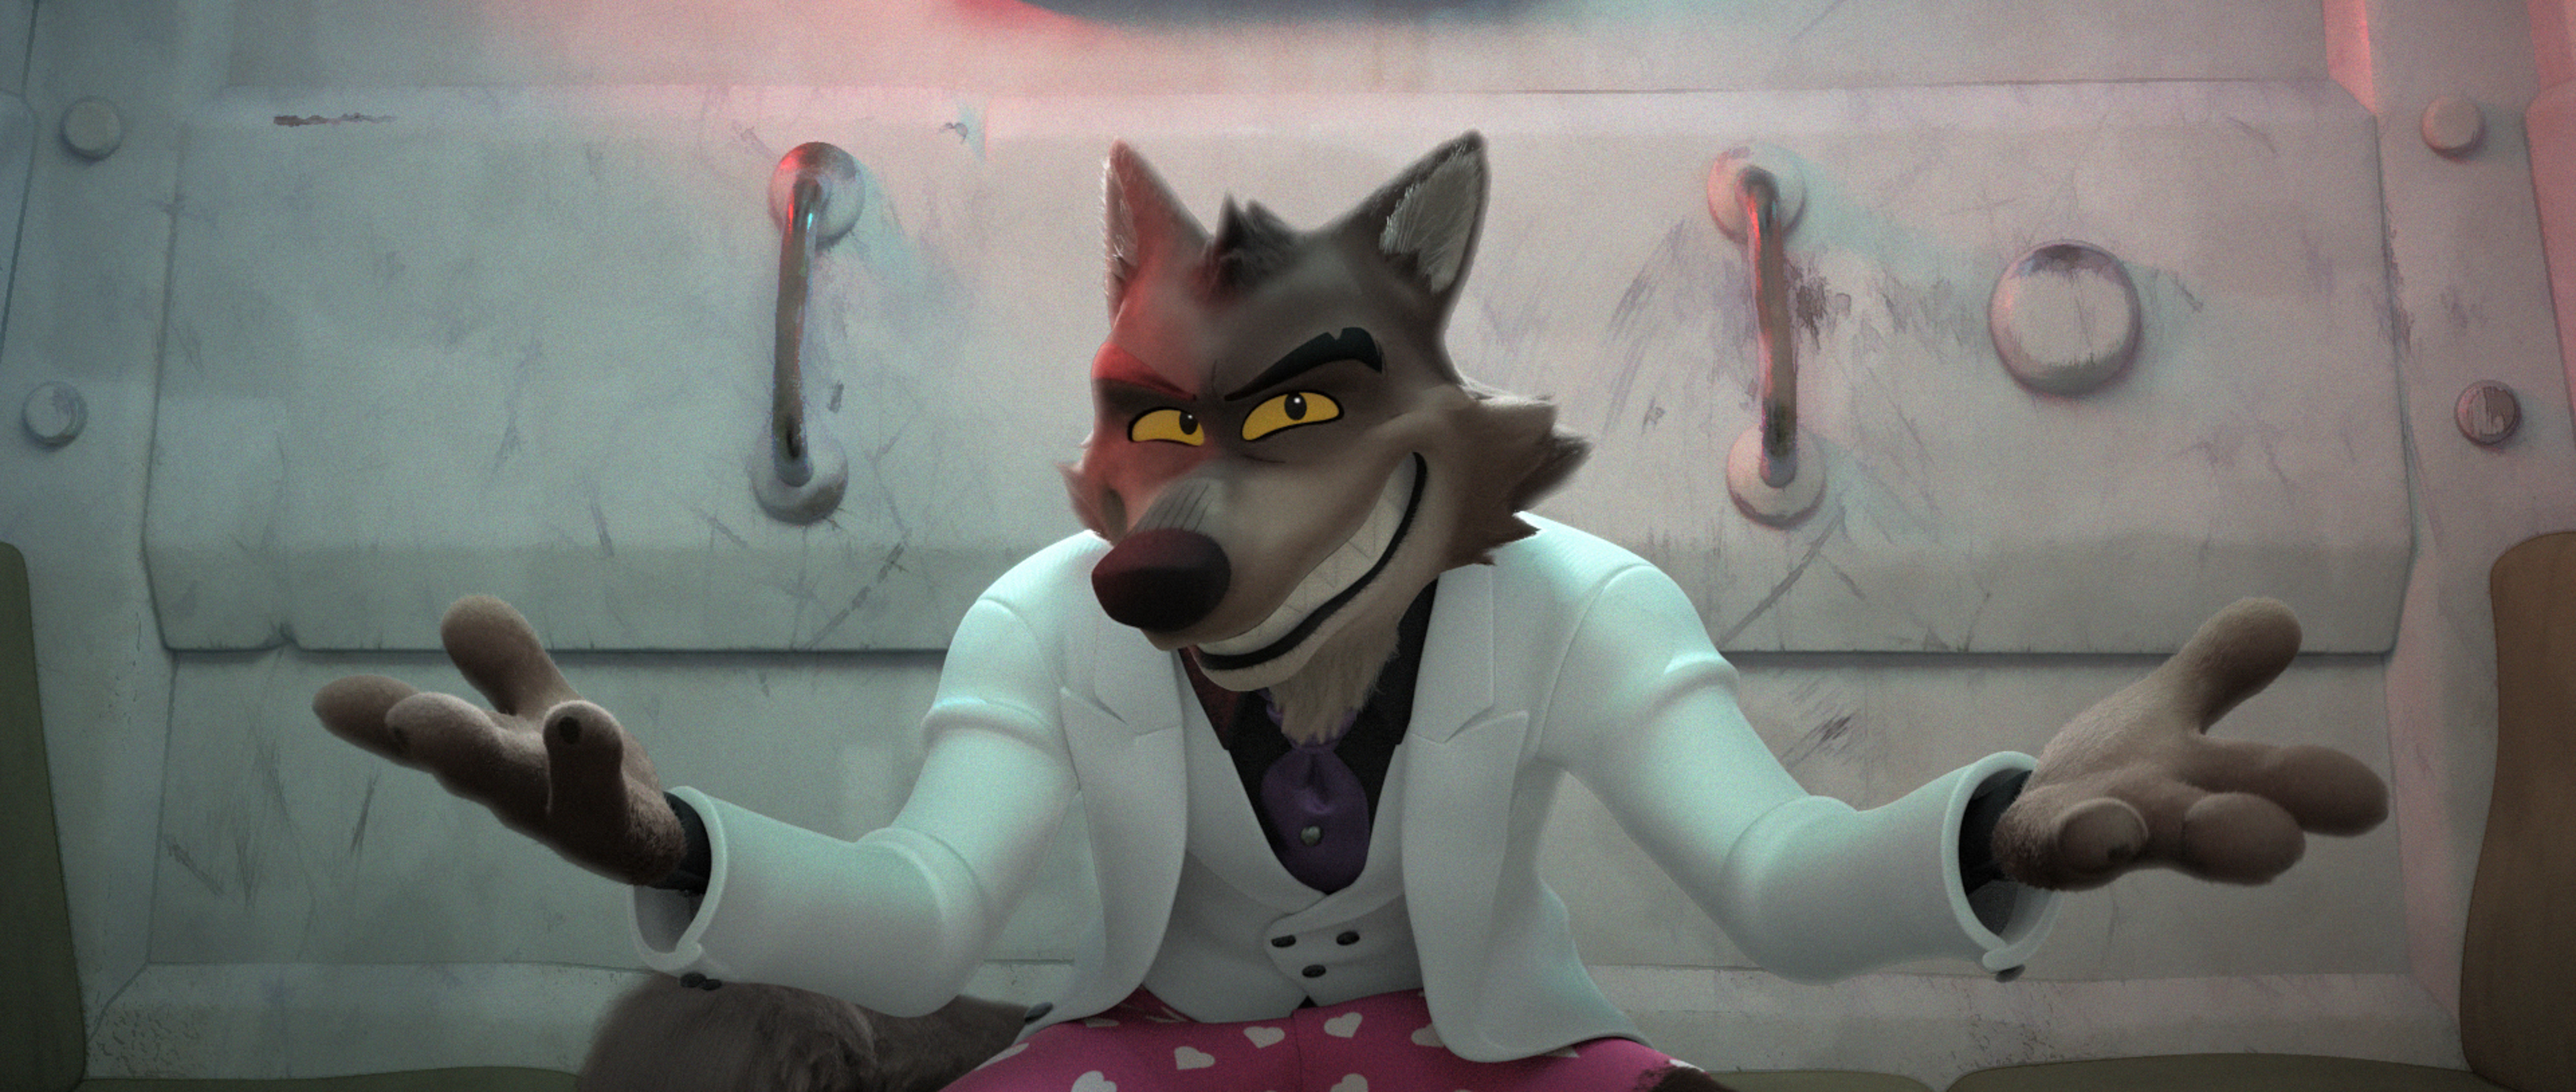 Mr. Wolf in a snazzy white suit in the back of a police car